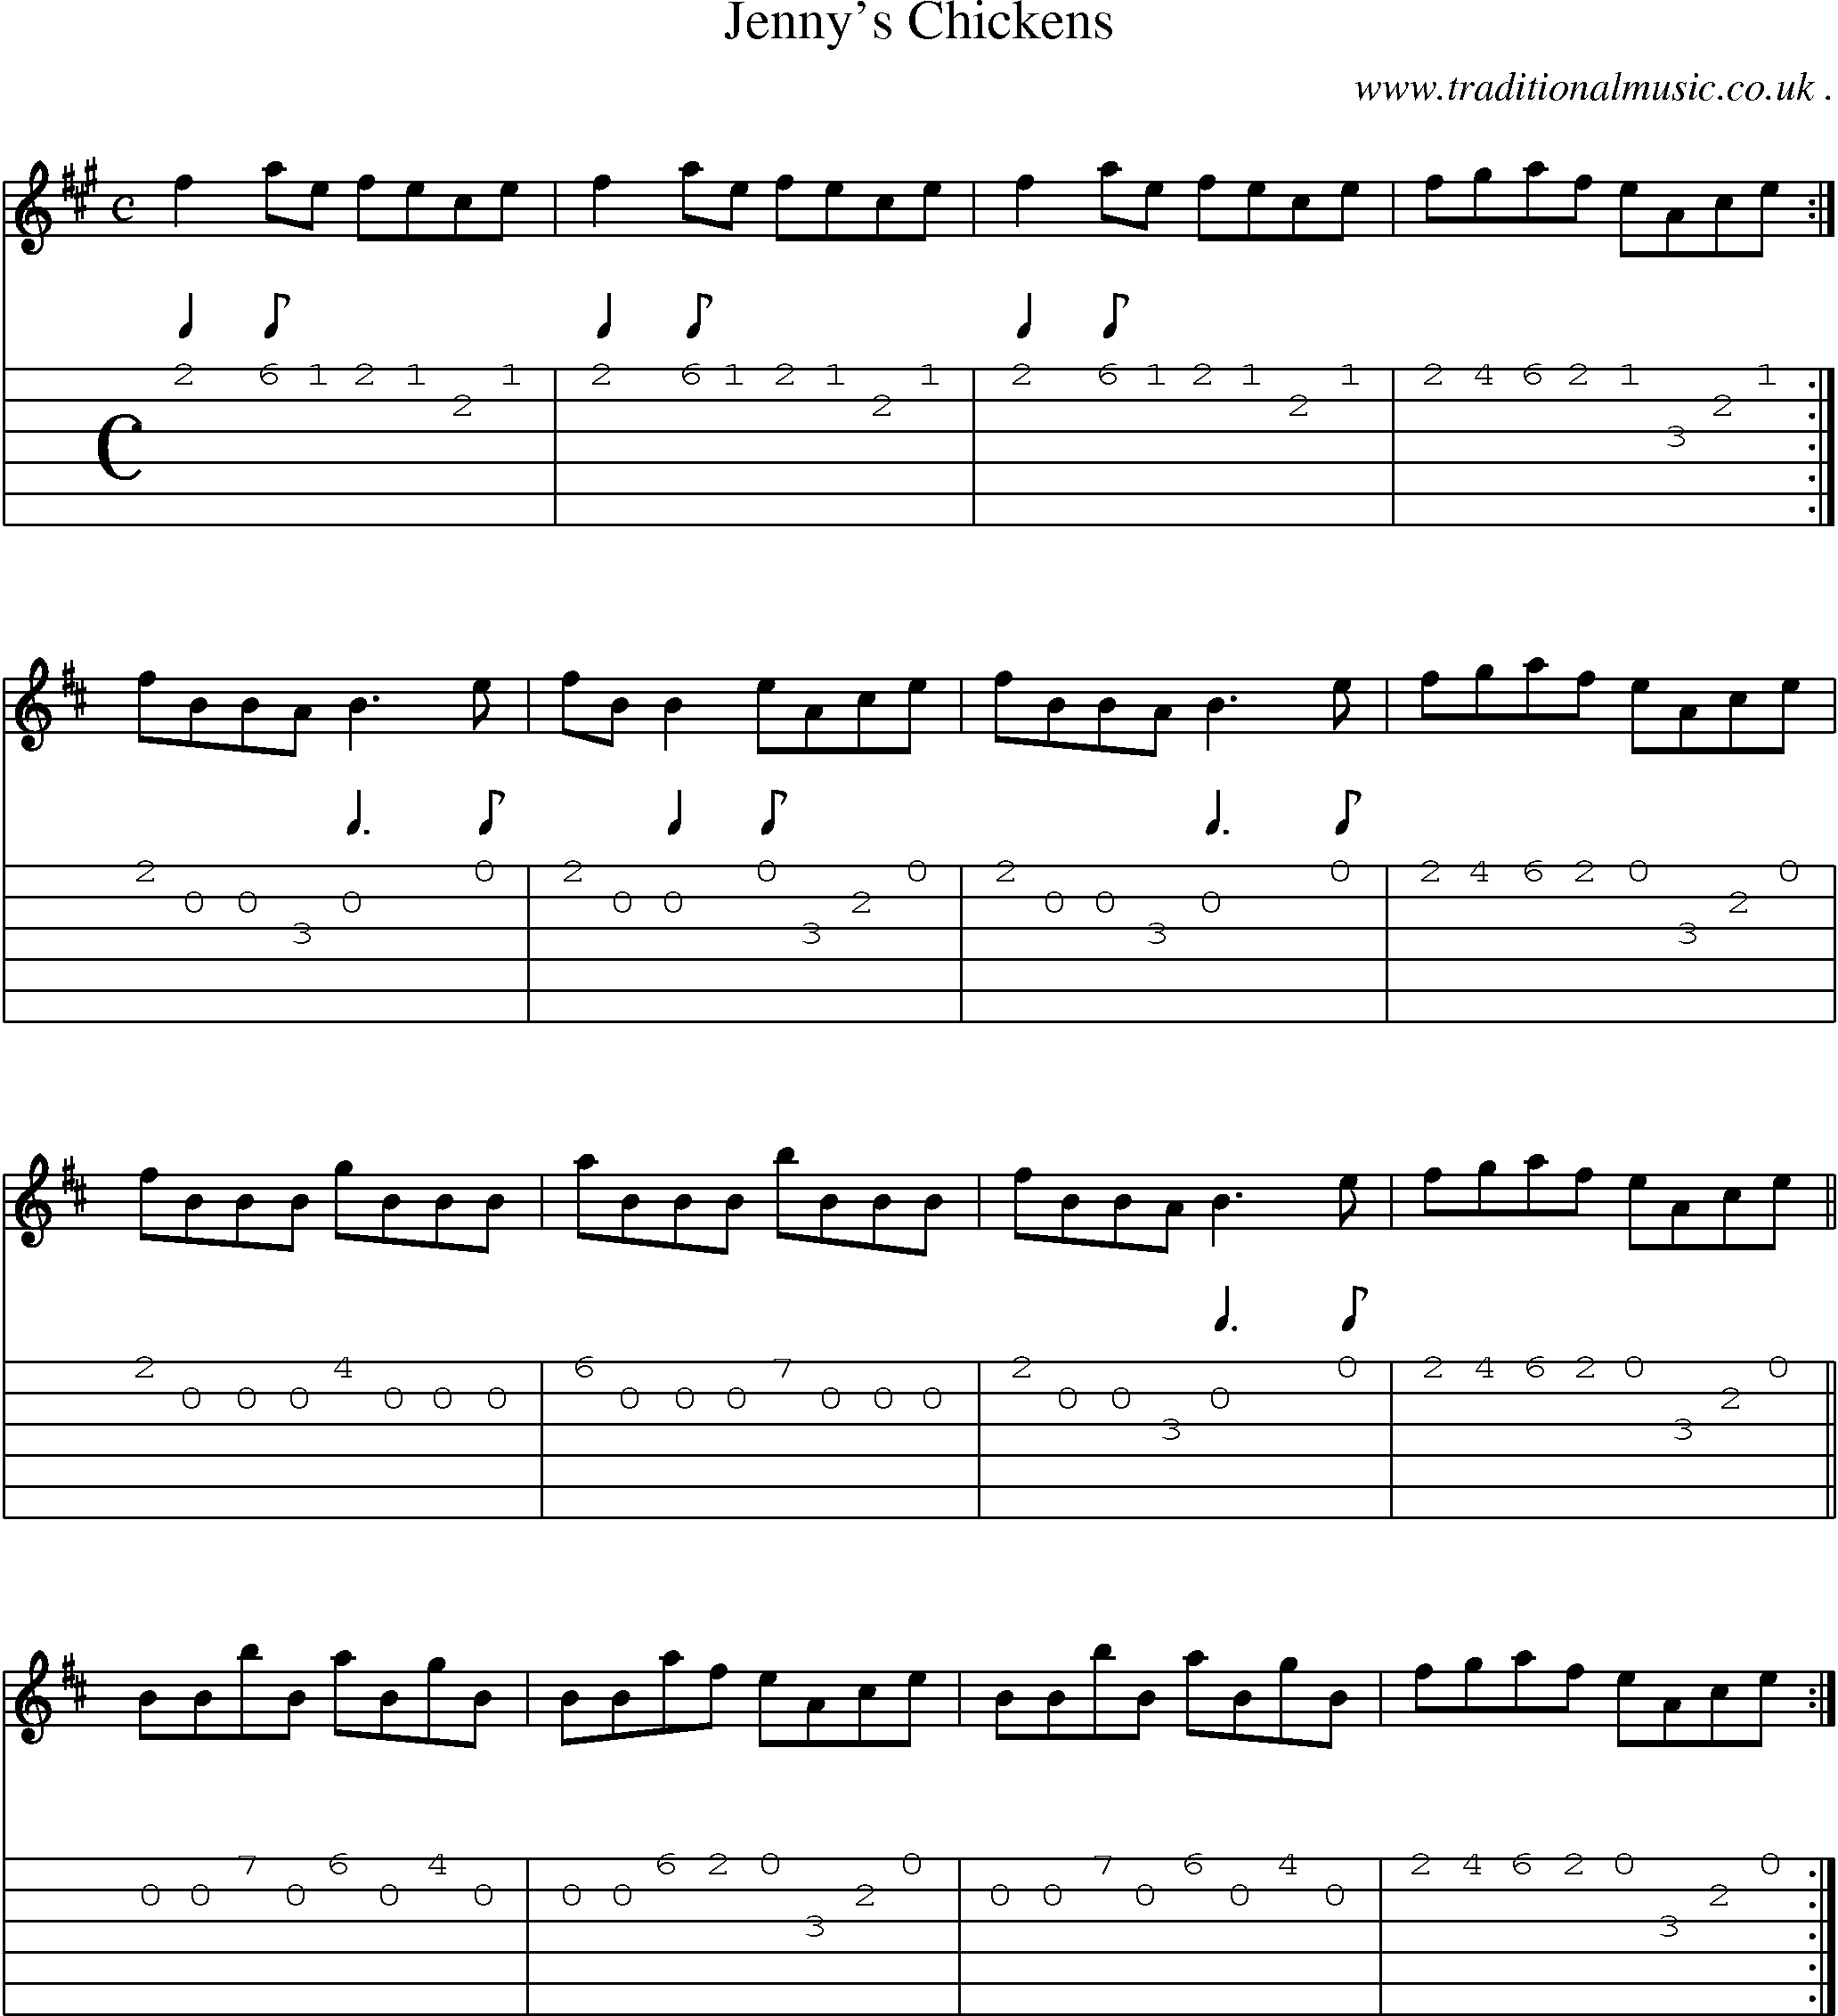 Sheet-Music and Guitar Tabs for Jennys Chickens